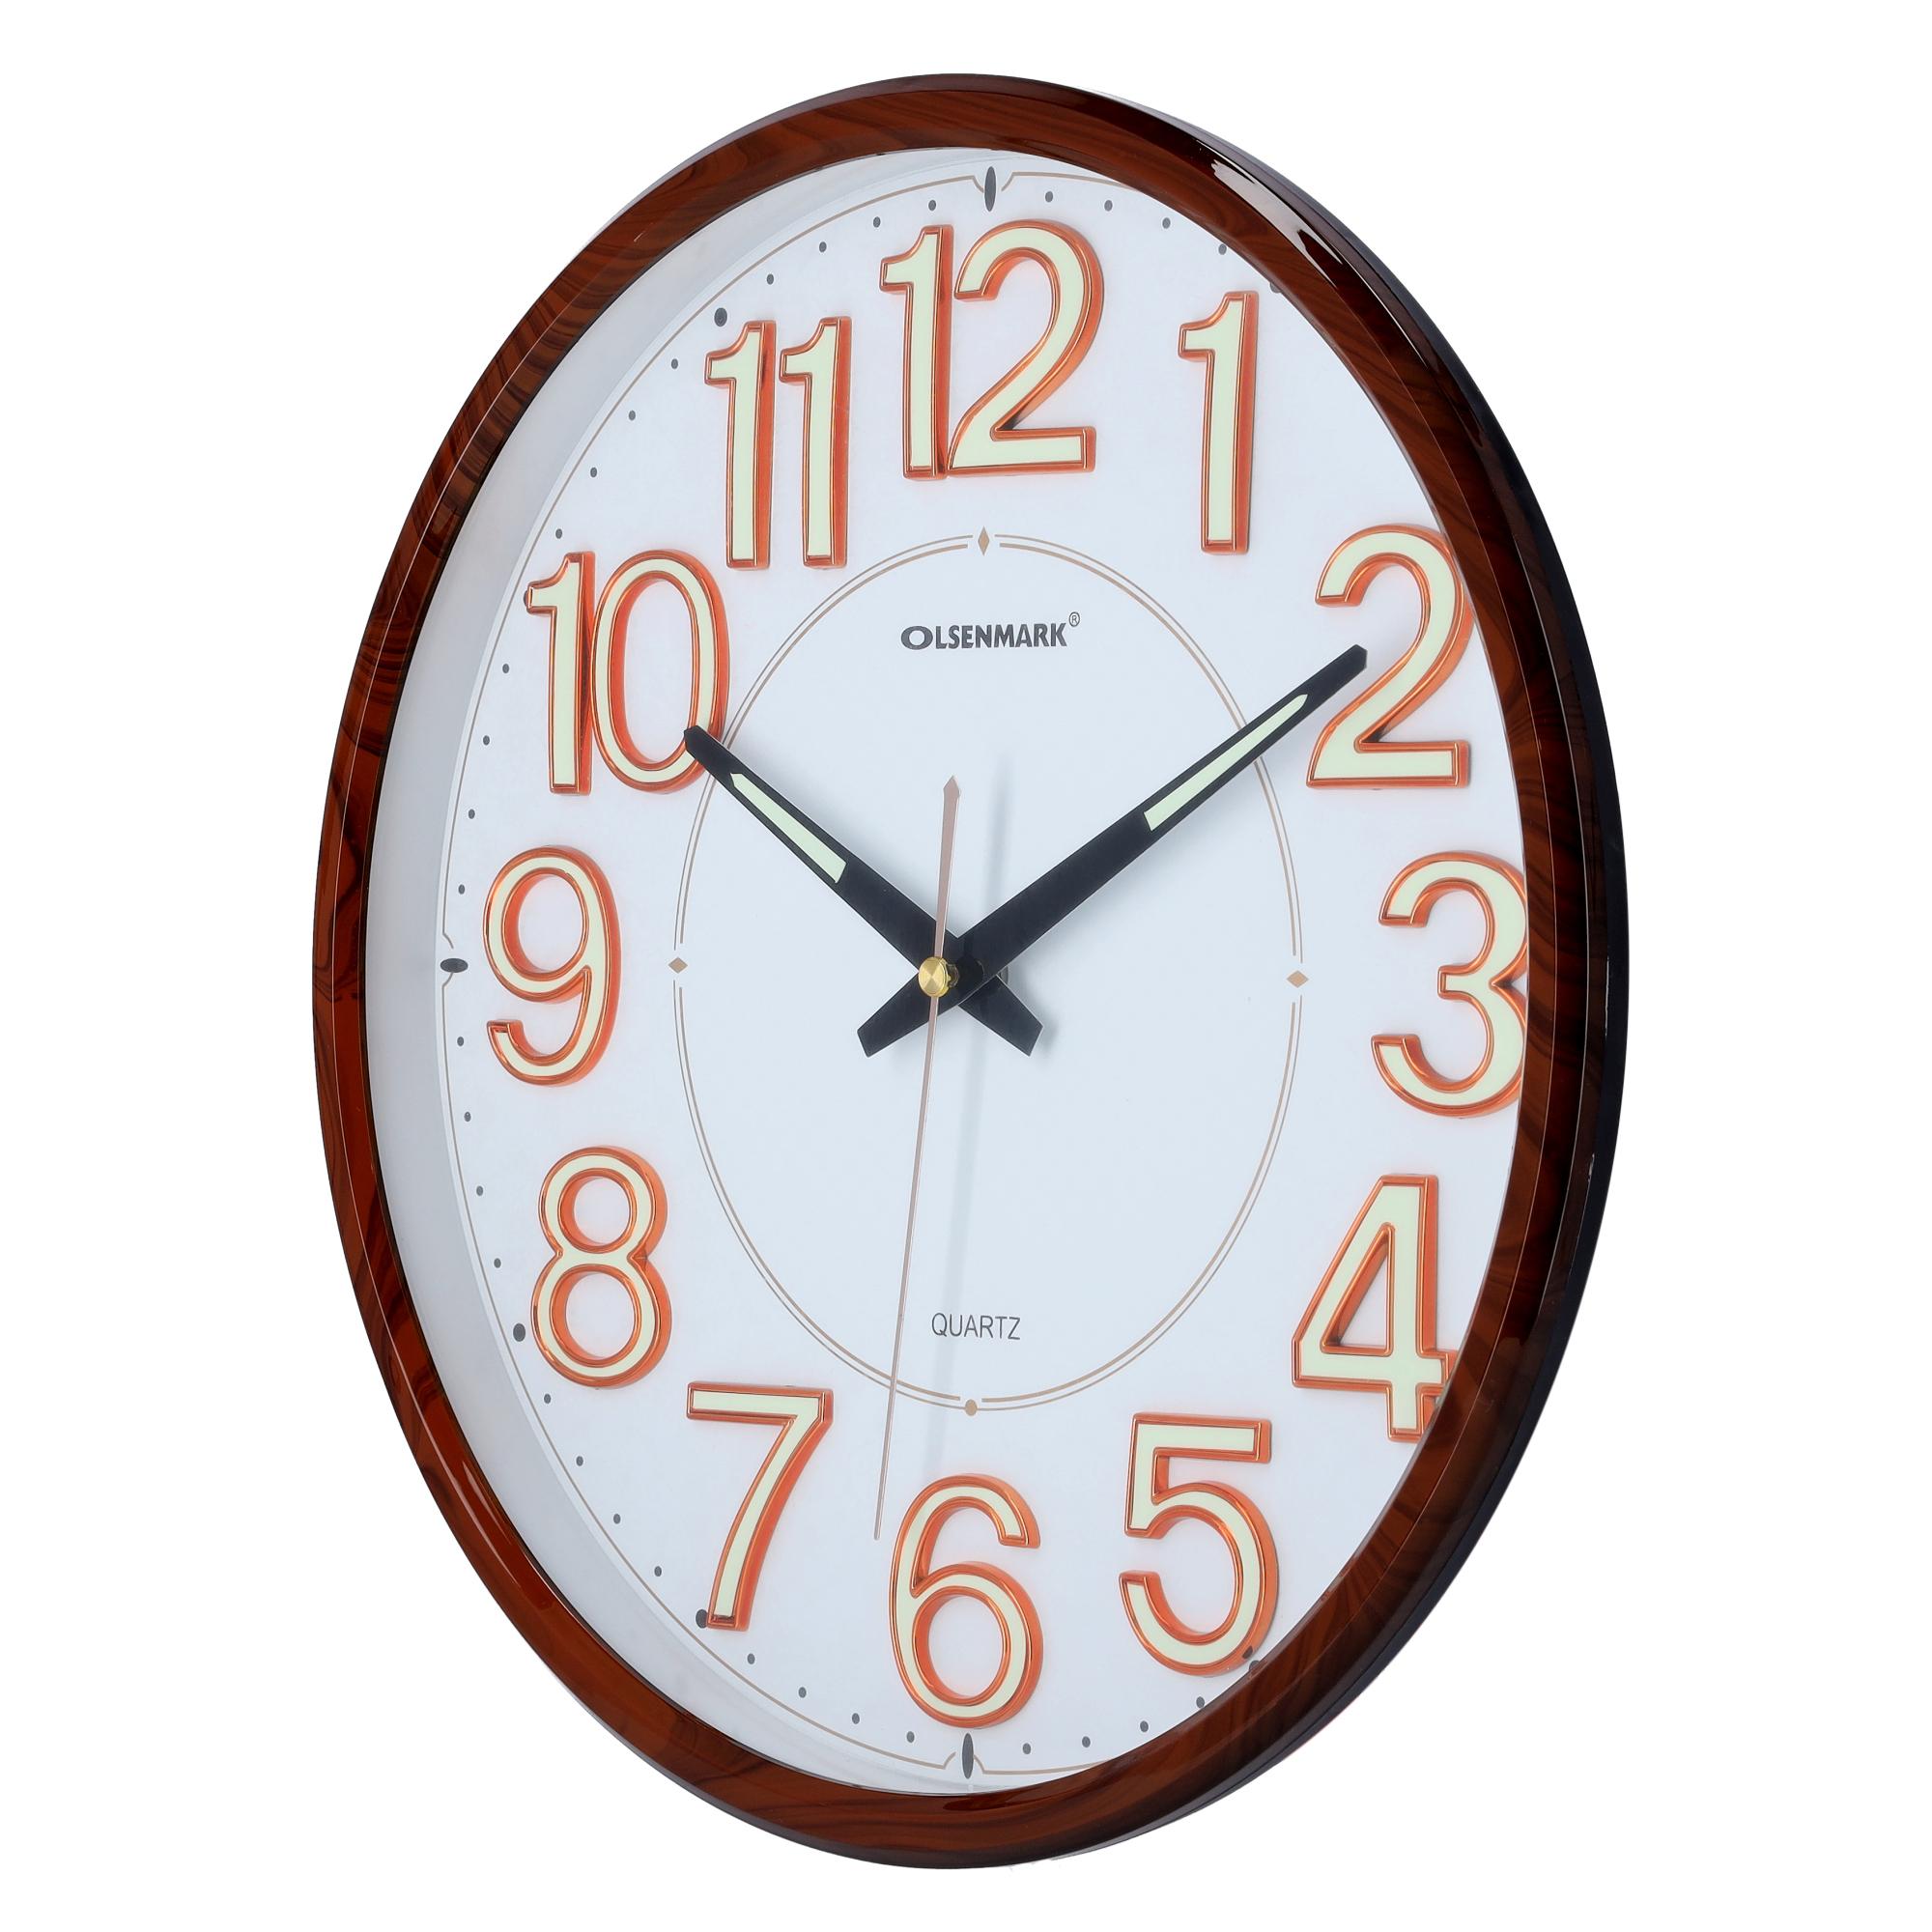 Olsenmark Wall Clock - Large Round Wall Clock, Modern Design - Easy To Read - Round Decorative Wall